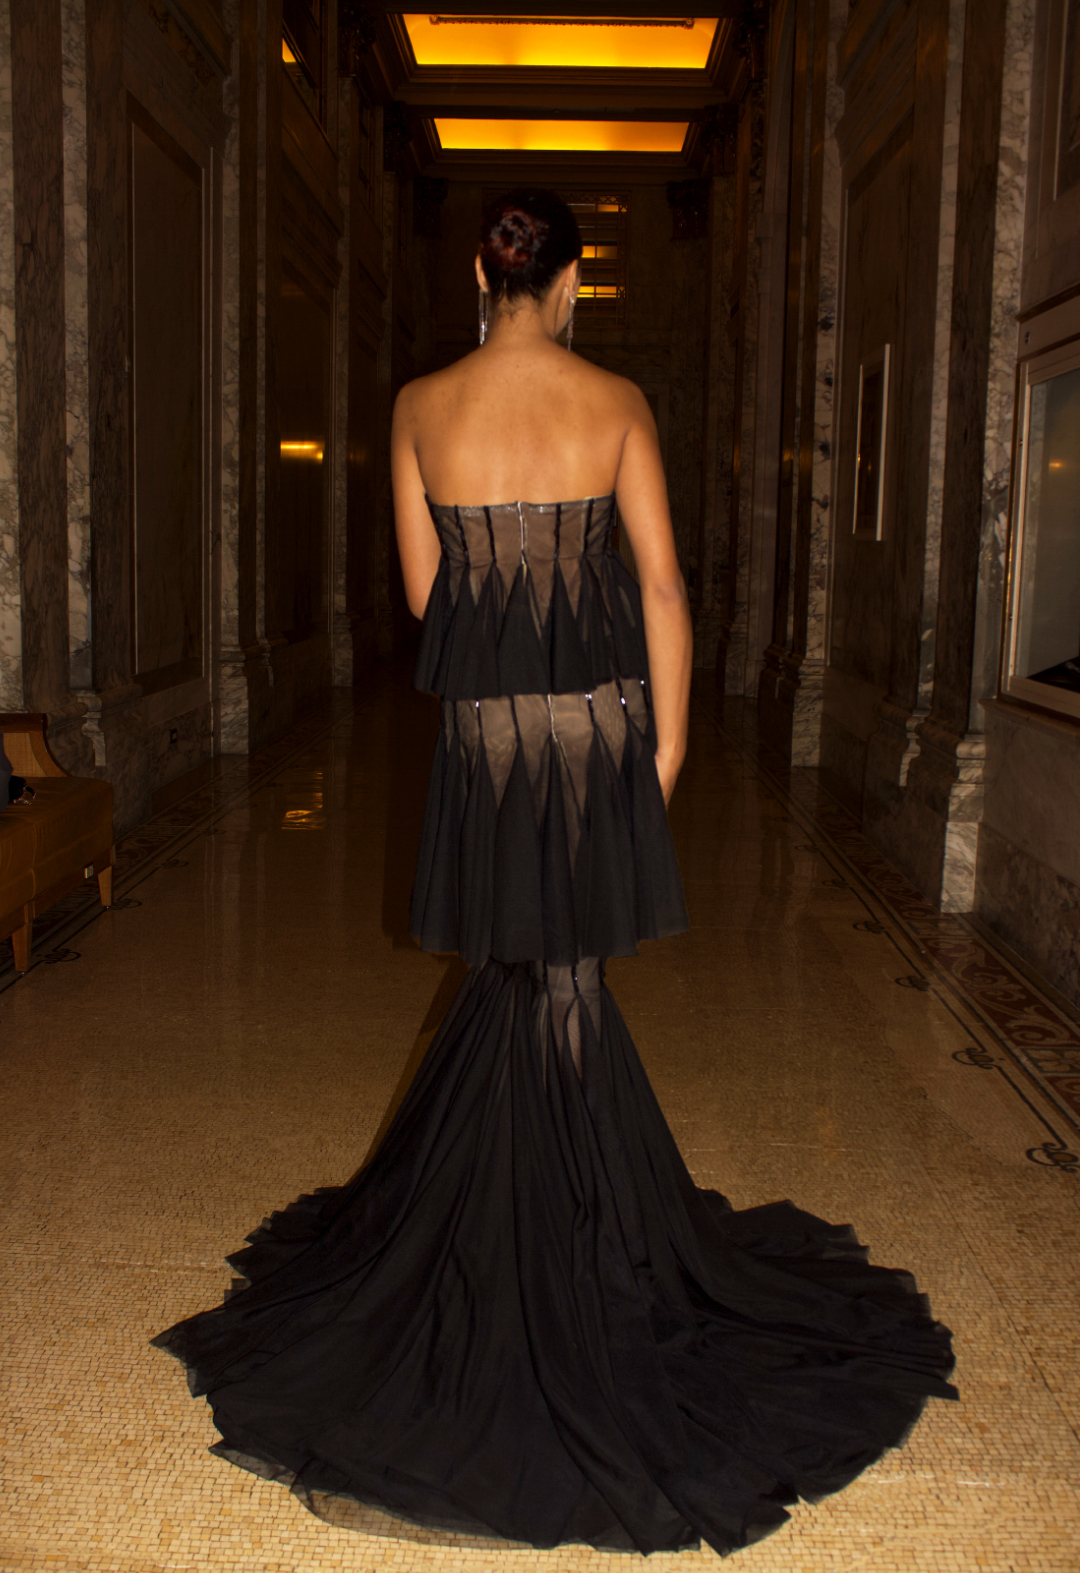 This is the back view of the black mesh three tiered gown. The gown has a train. In the image, the model is standing in a hallway with the main focus on the dress and a darker background. 